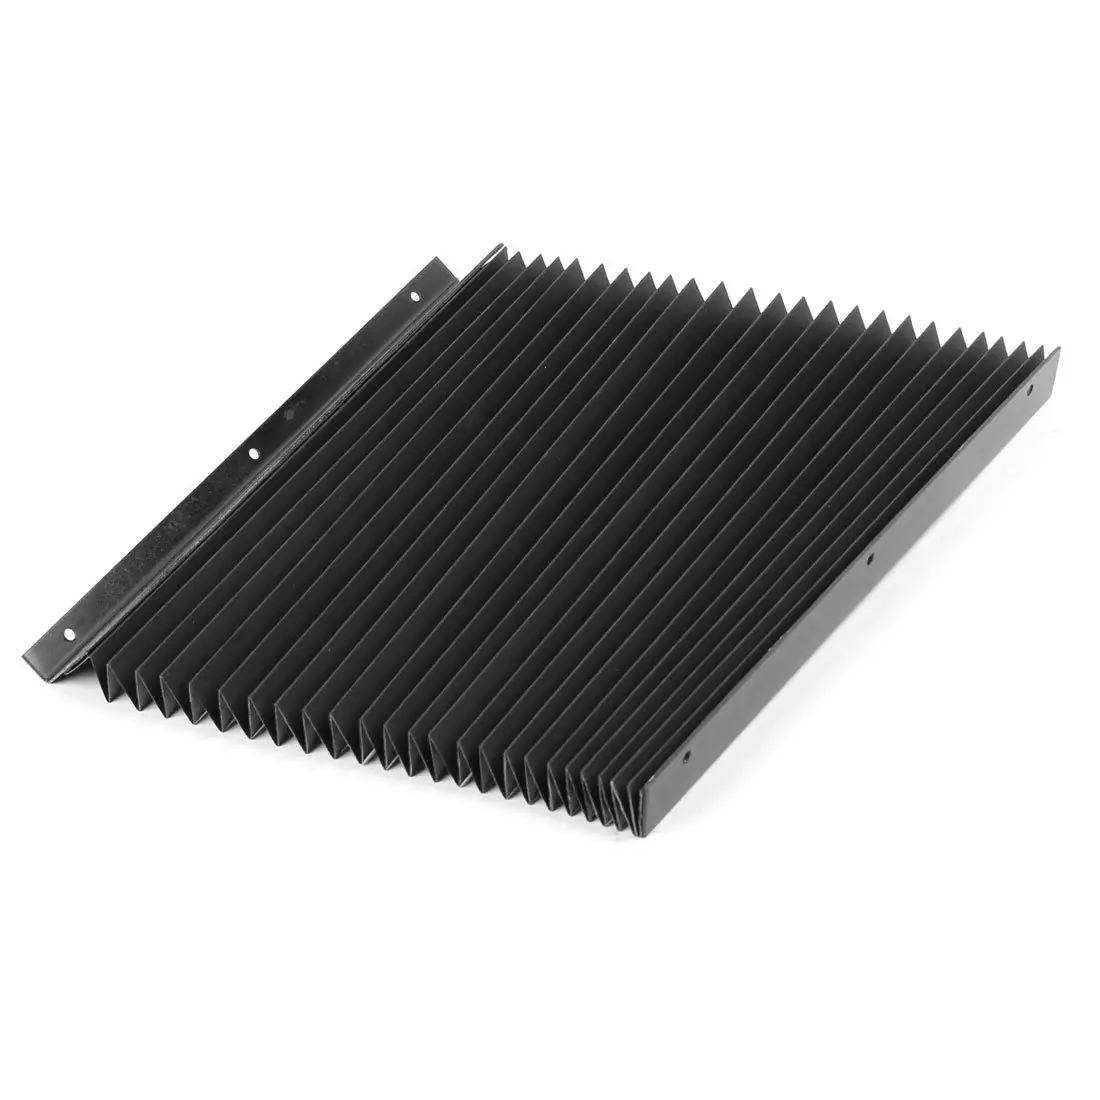 Protective Synthetic Rubber Rectangle Accordion Dust Cover